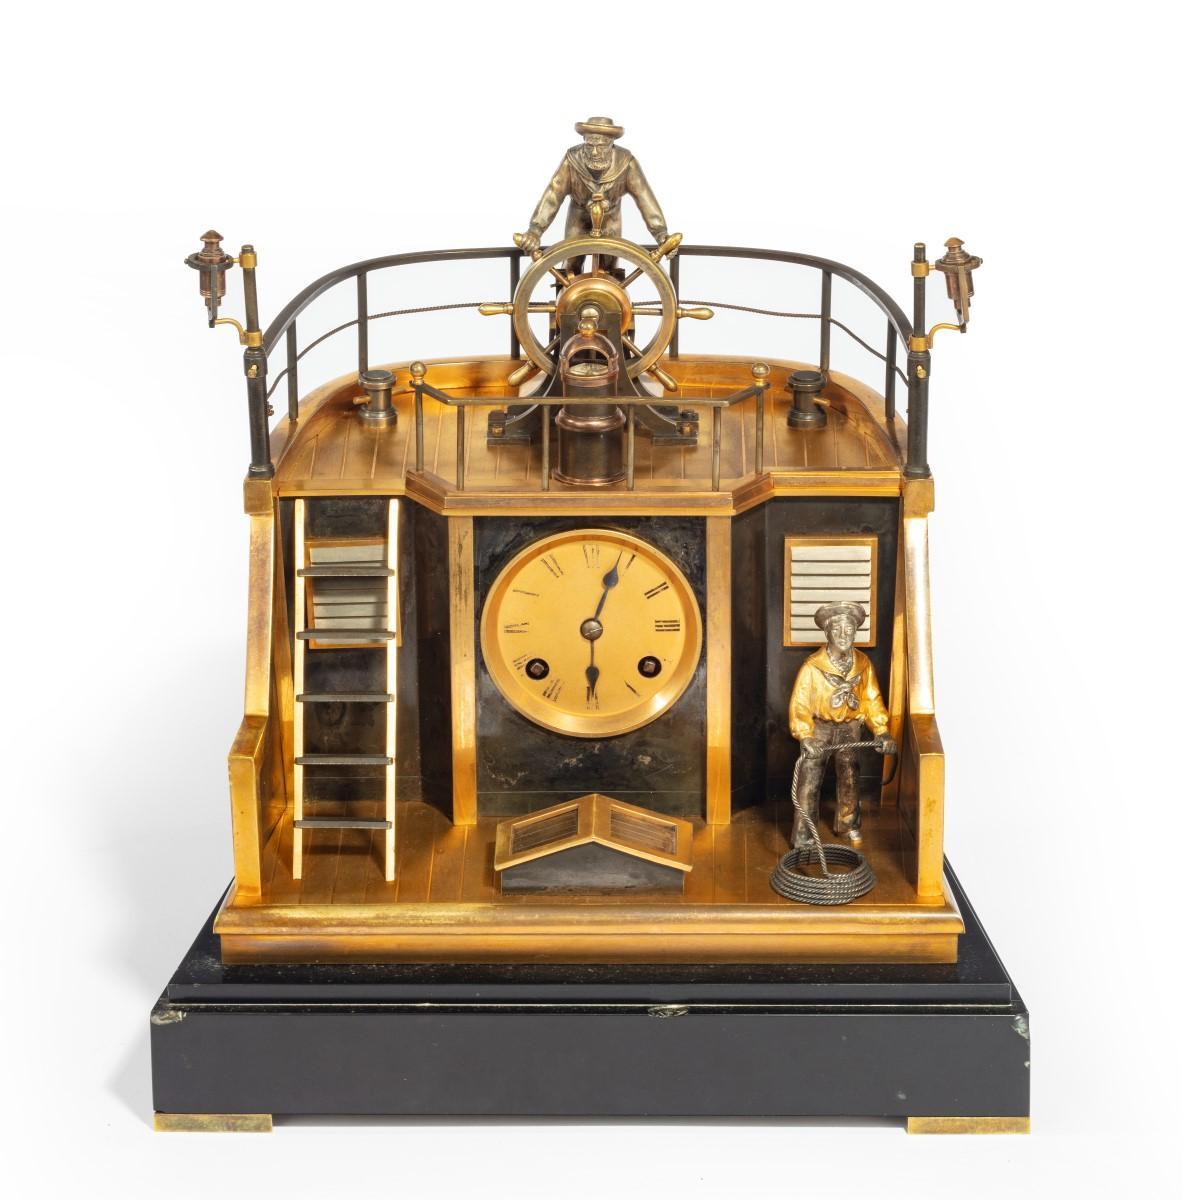 A late 19th century French gilt-brass and steel novelty ‘quarterdeck’ mantel clock by Guilmet, Paris, the eight-day gong striking movement with anchor escapement, circular gilt Roman numeral dial with steel spade hands, the case made as the stern of